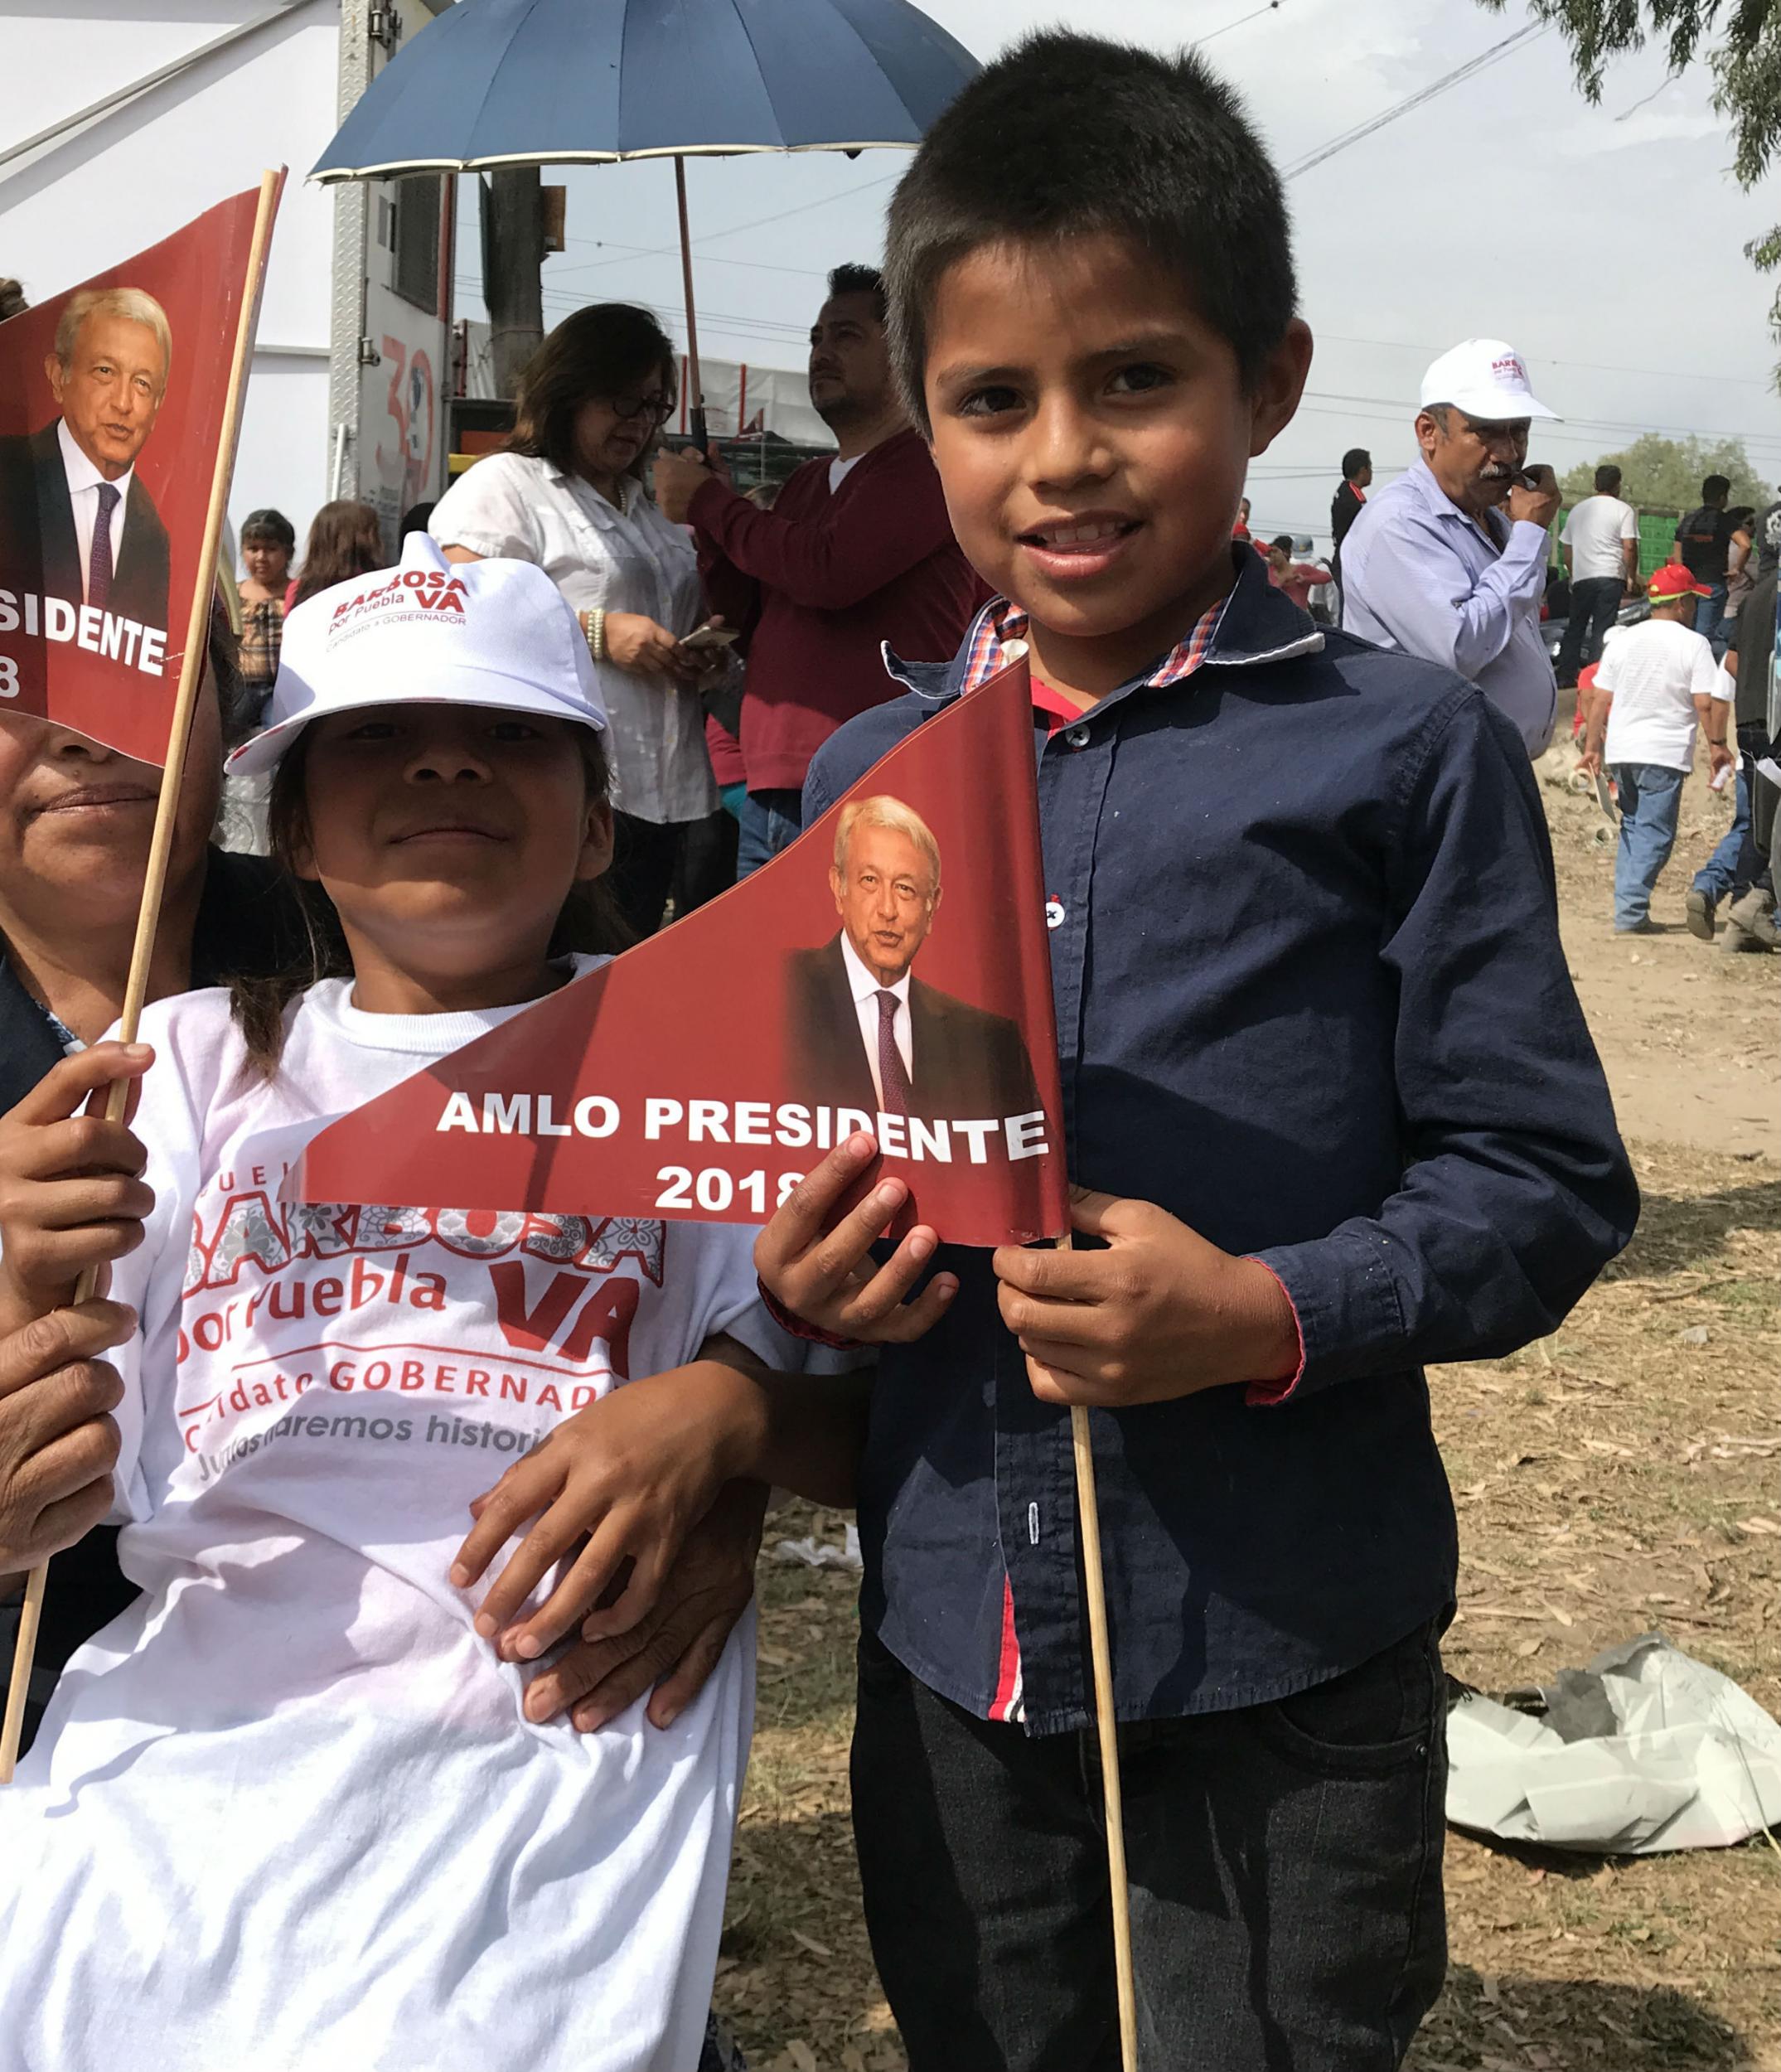 Parents bring their children to the Tecamachalco rally to cheer on AMLO